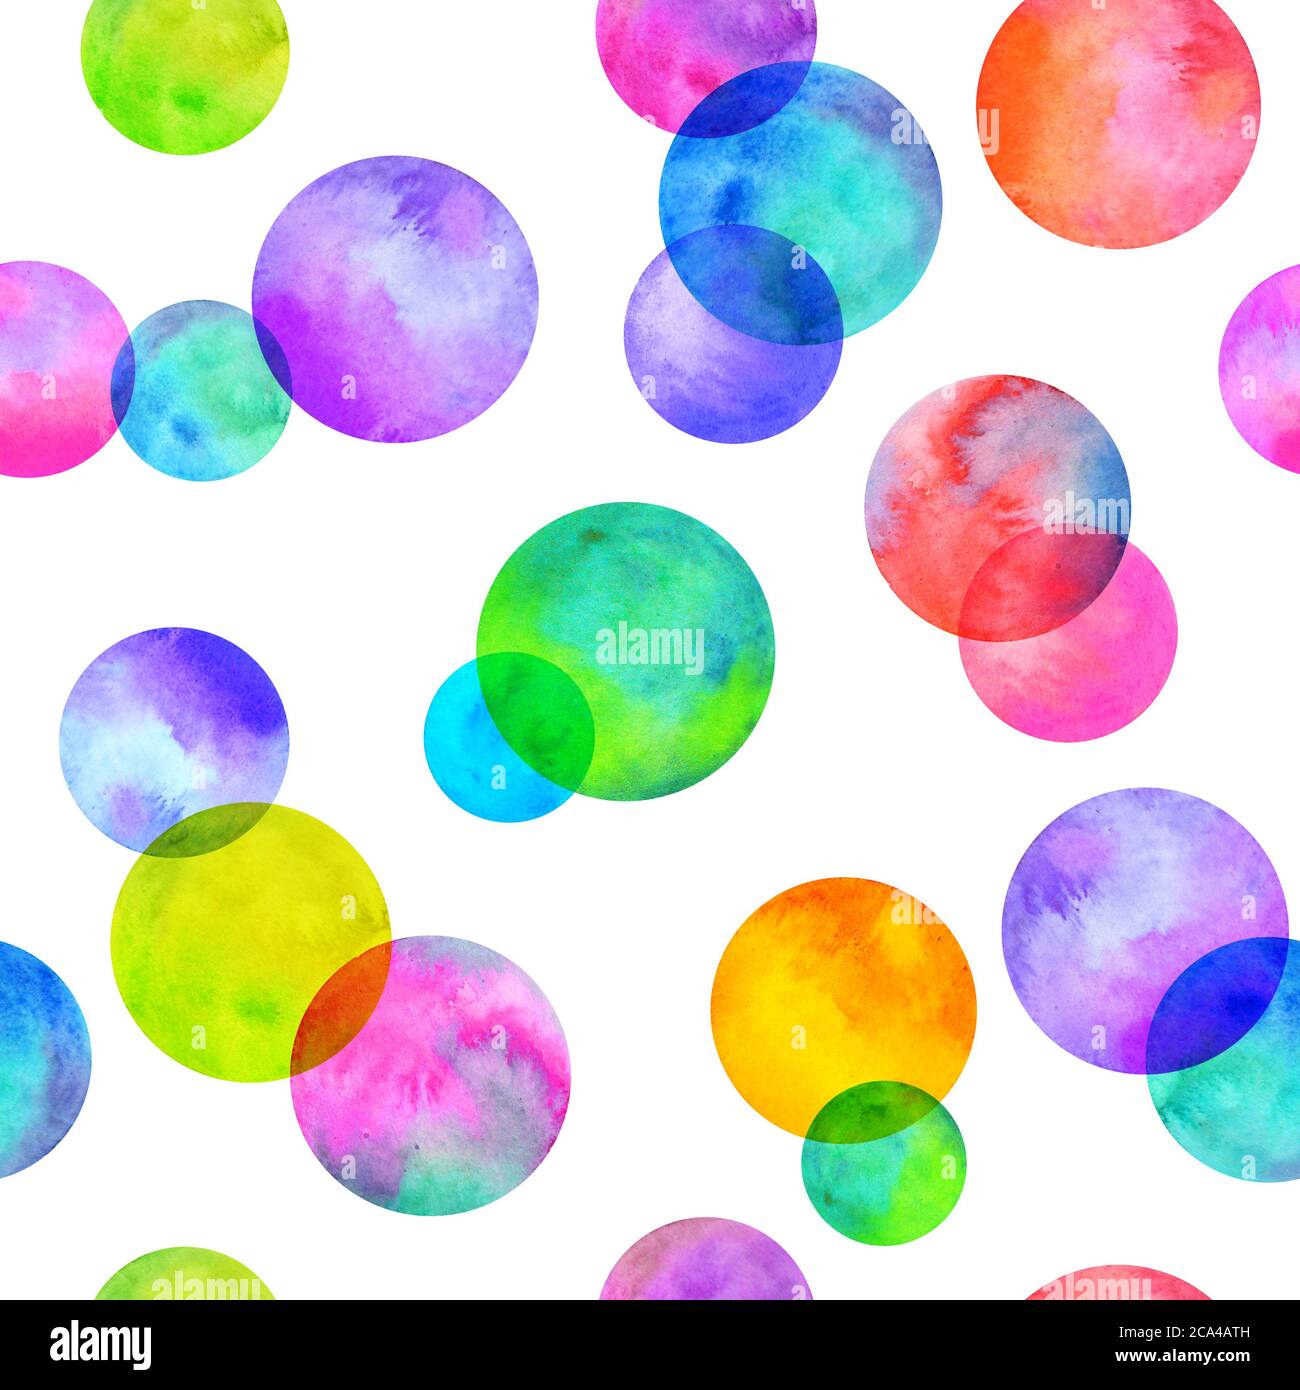 Circles multi-colored neon watercolor seamless pattern. Abstract watercolour background with colorful circles on white. Hand drawn round shaped textur Stock Photo